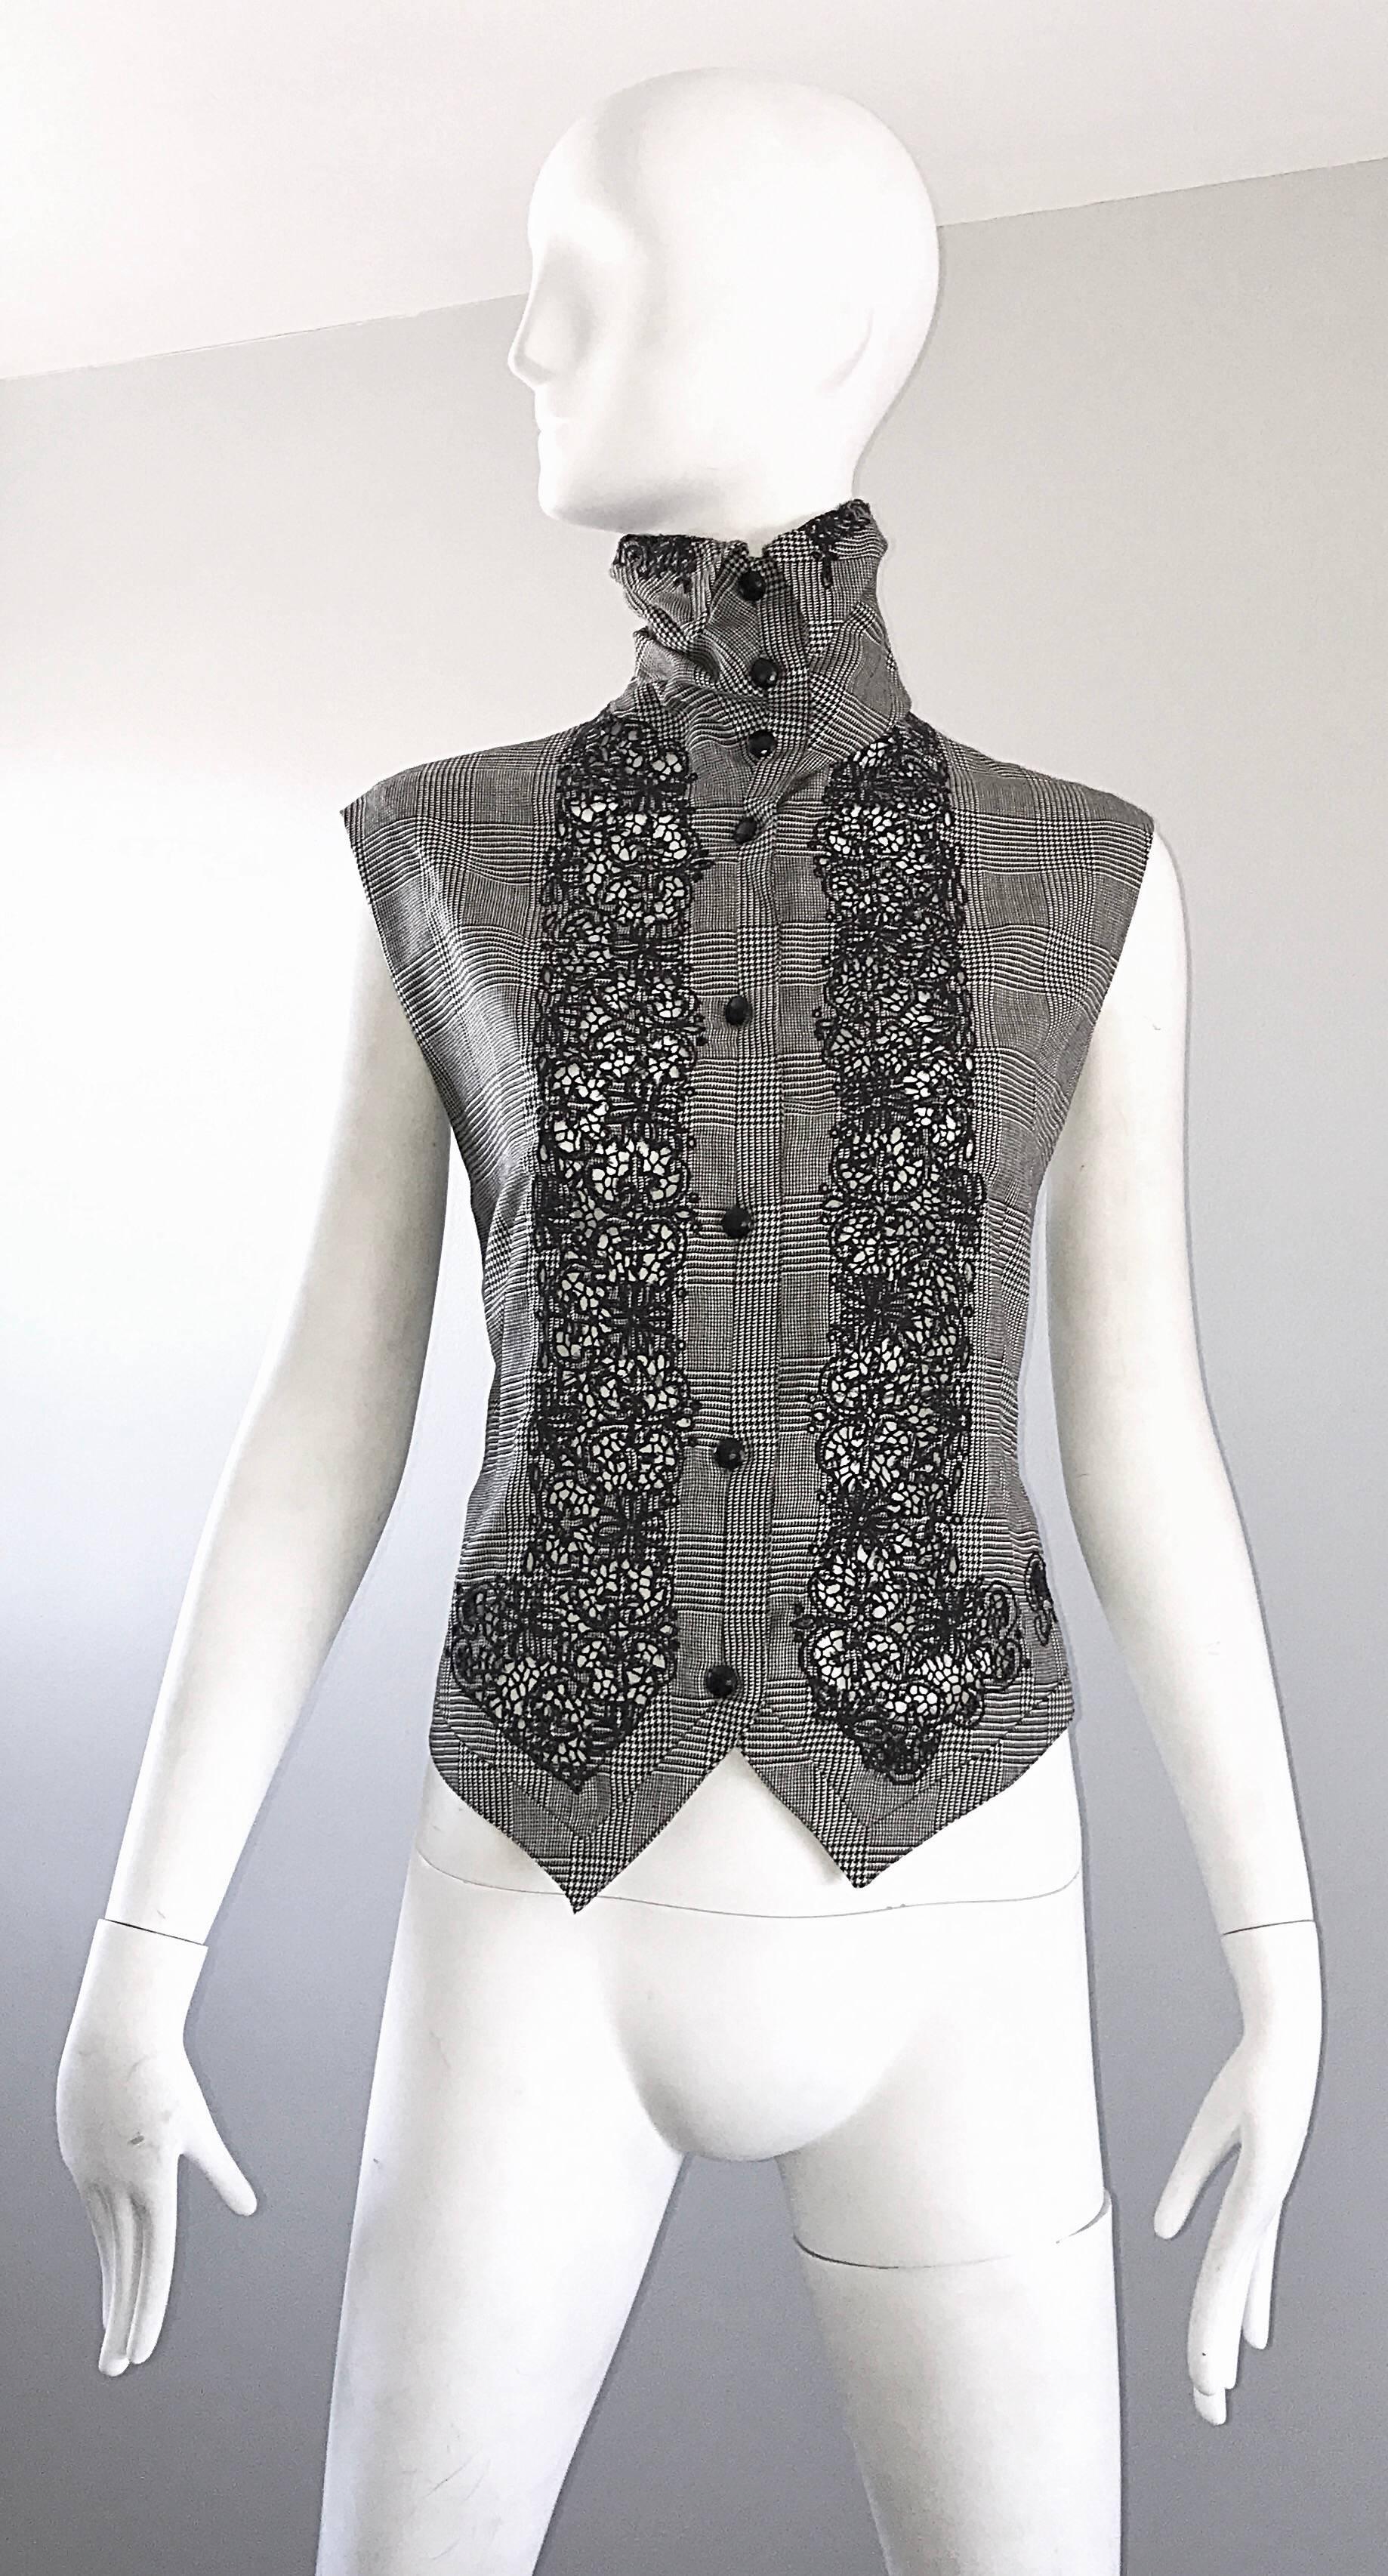 Rare and important vintage GIANNI VERSACE early black and white houndstooth plaid sleeveless dolman sleeve shirt waistcoat ! Perfect layered with a blouse, or alone. Avant Garde style with an asymmetrical hem, and a riches high neck. Black lacquer